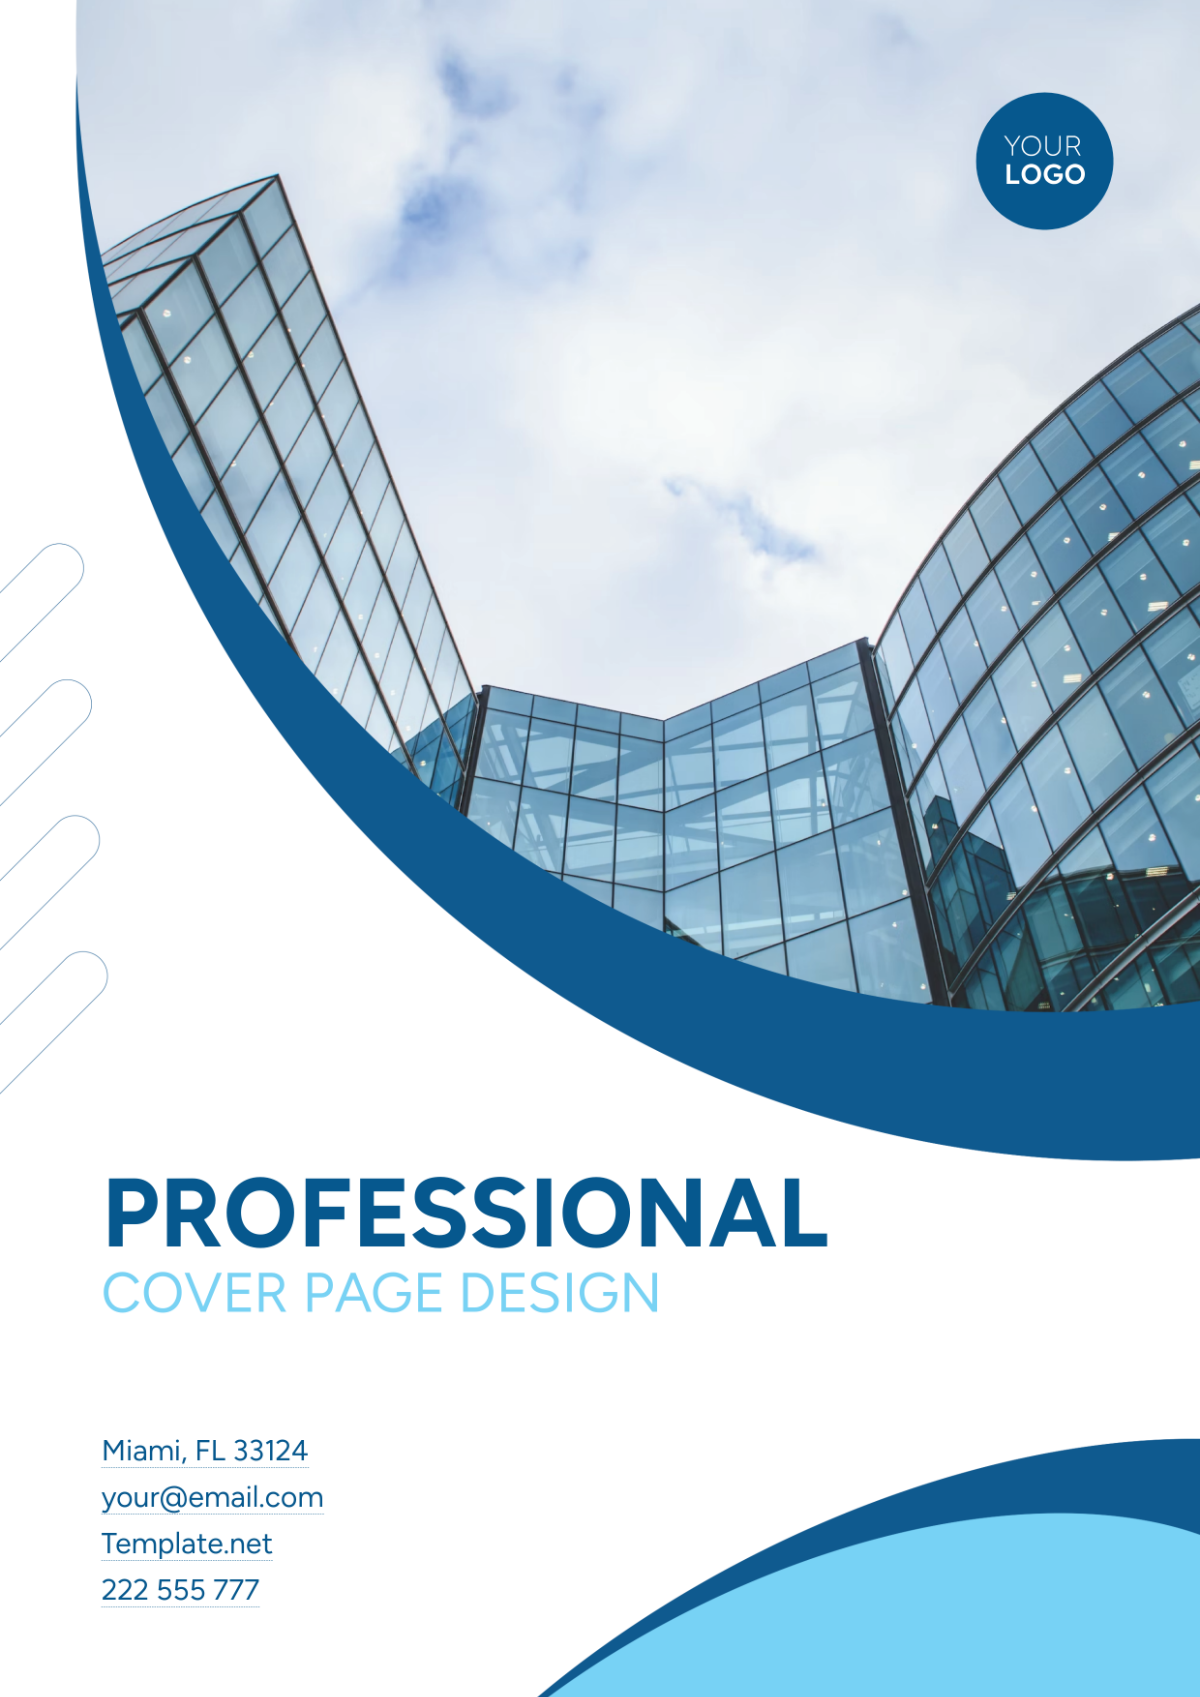 Professional Cover Page Design